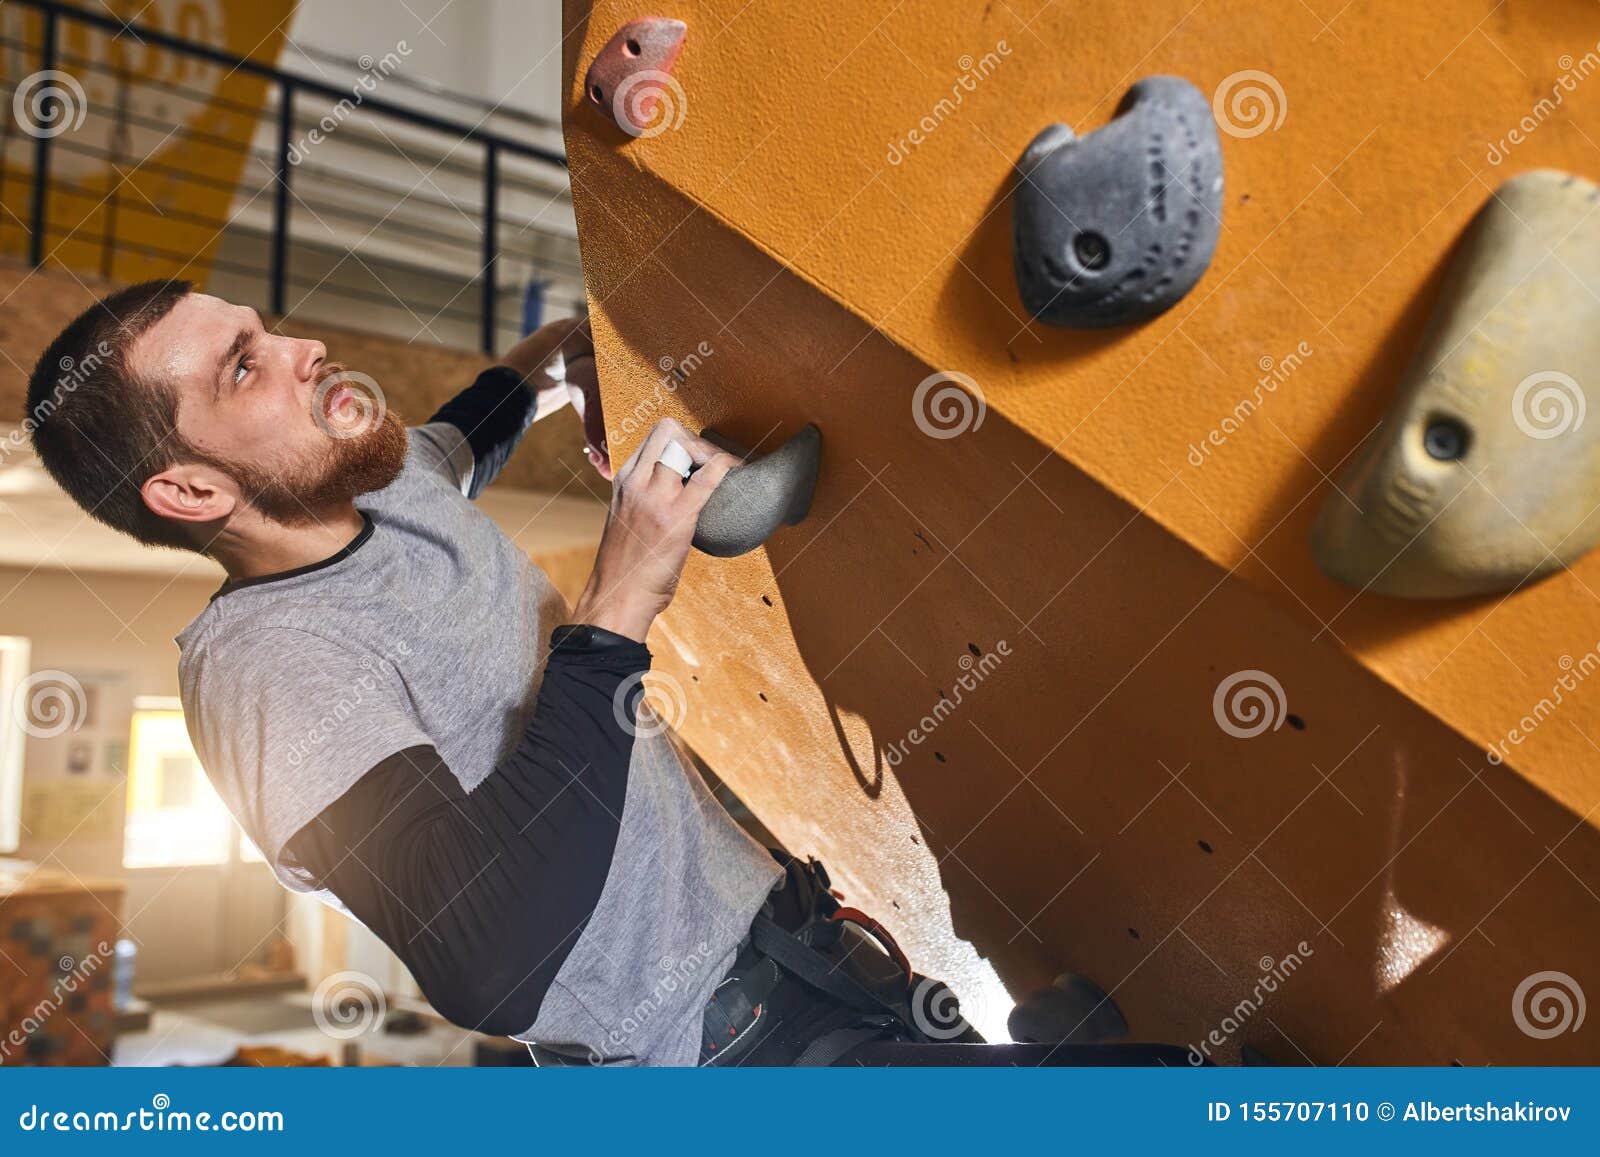 Cheerful Rock-climber Without Forearm Training At Indoor ...